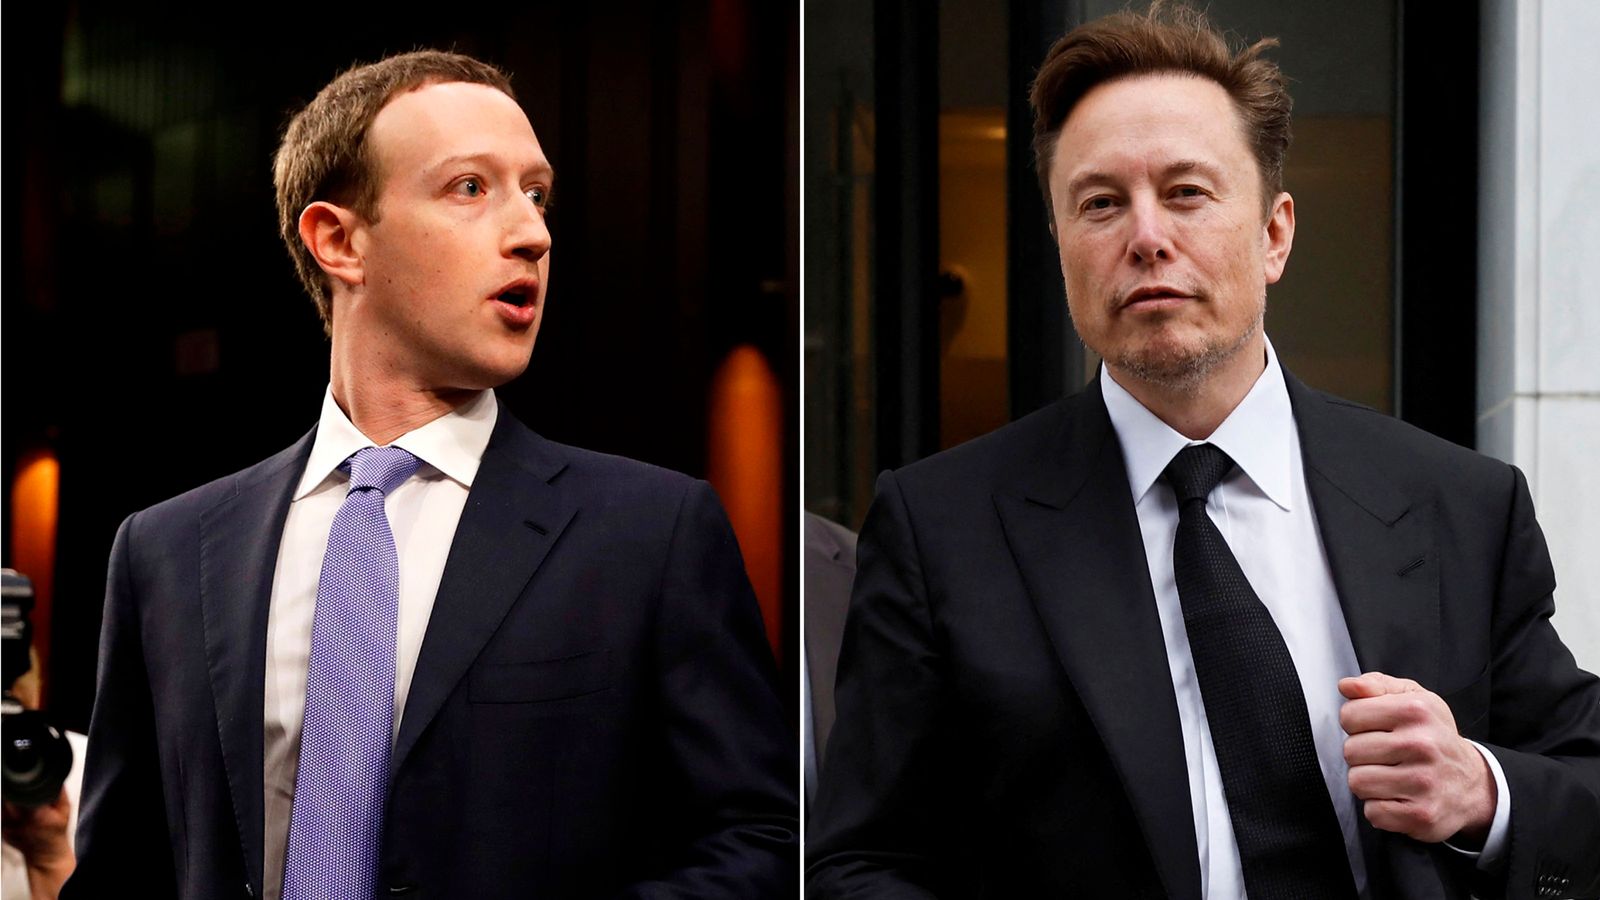 Musk teases 'epic location' for fight - but Zuckerberg says he is 'not holding his breath'